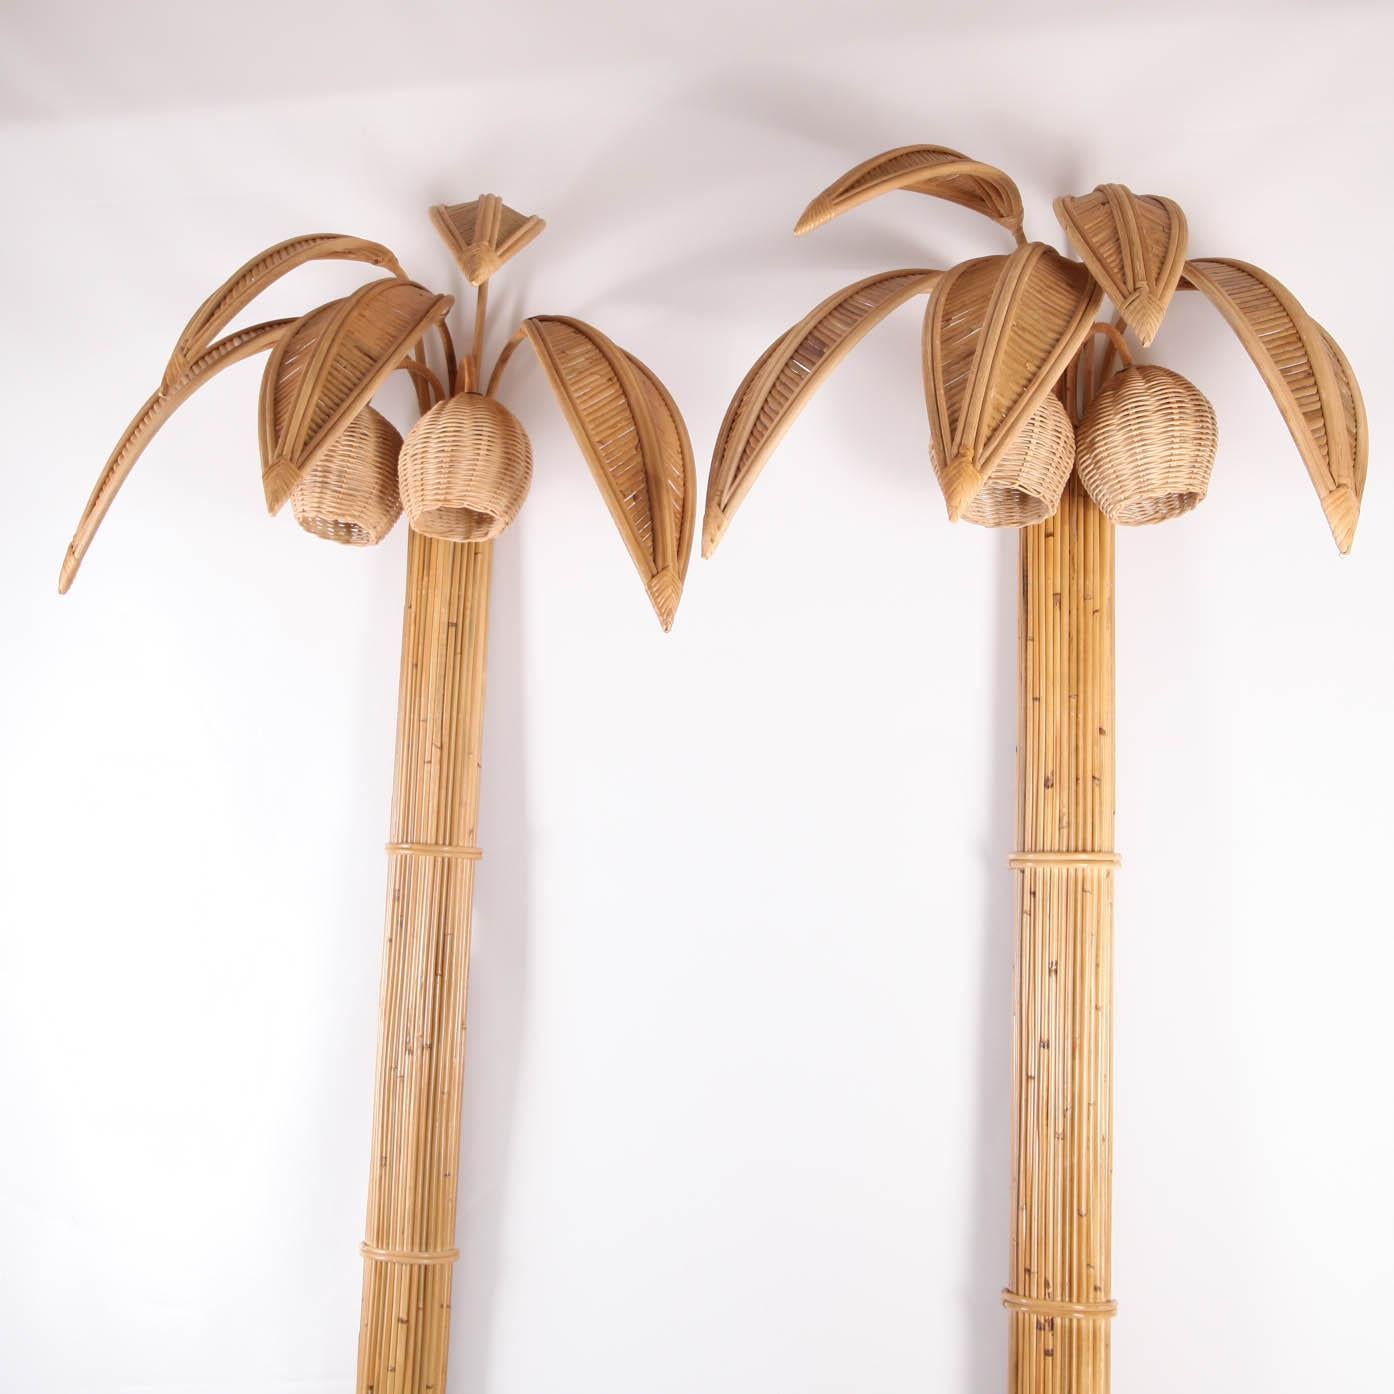 Unique hand made pair of large rattan coconut tree / palm tree wall lights. They come with 2 lights on each. Very beautiful as a wall decoration.